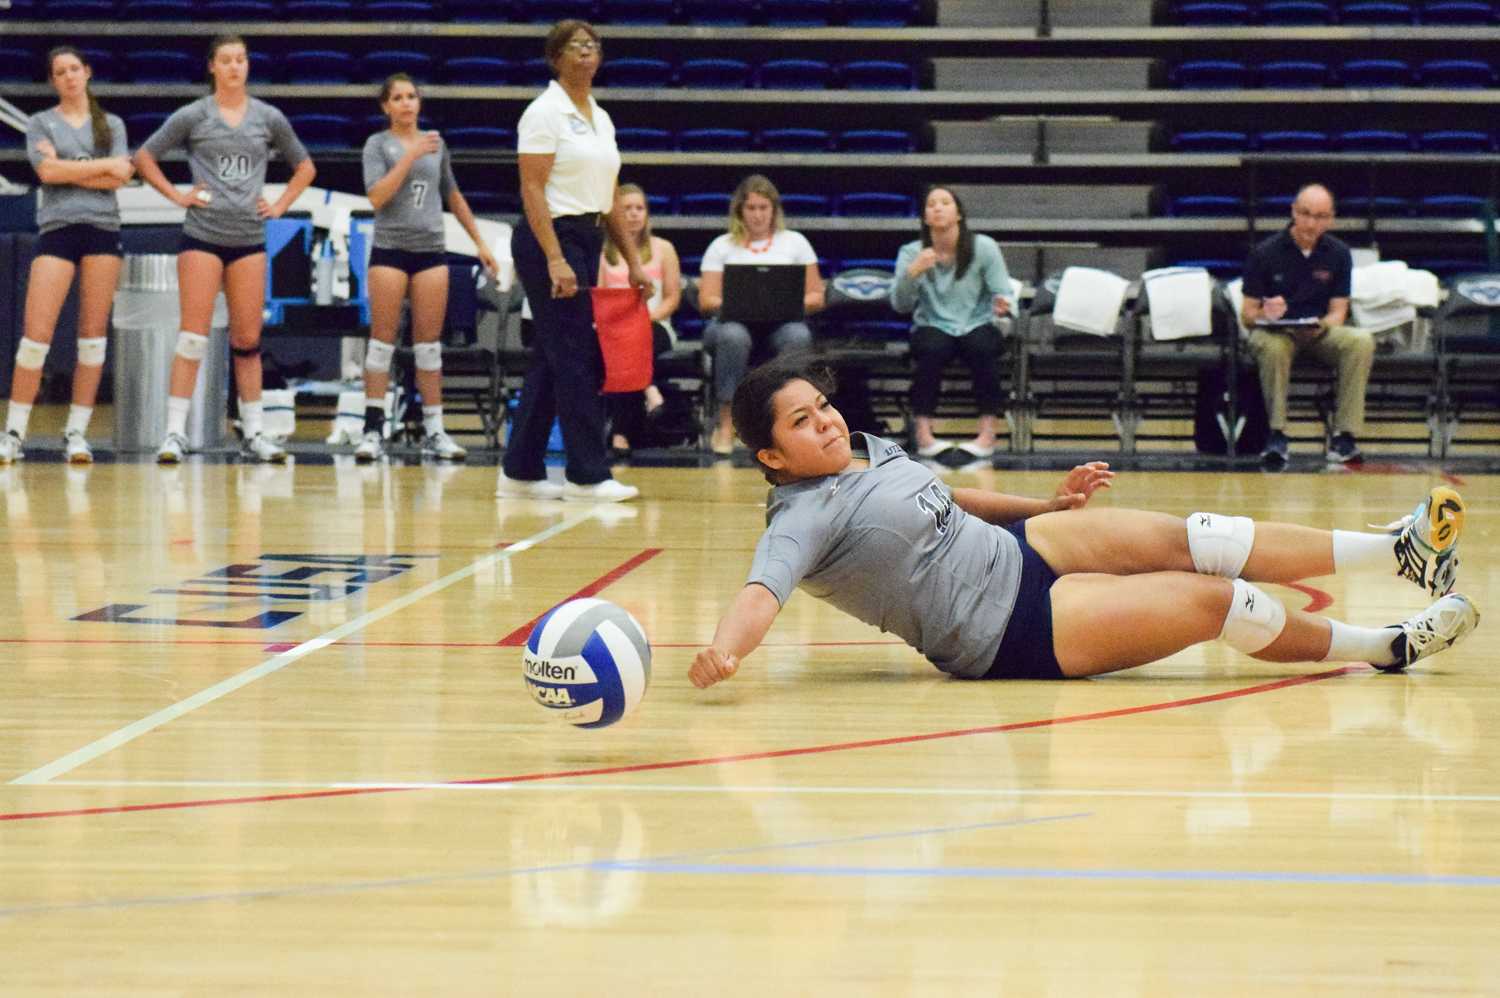 Libero Naomi Whitehair misses the dig after diving during the second game of UTEP’s 3-0 loss to FAU. Whitehair had four digs in the match. Ryan Lynch | Sports Editor